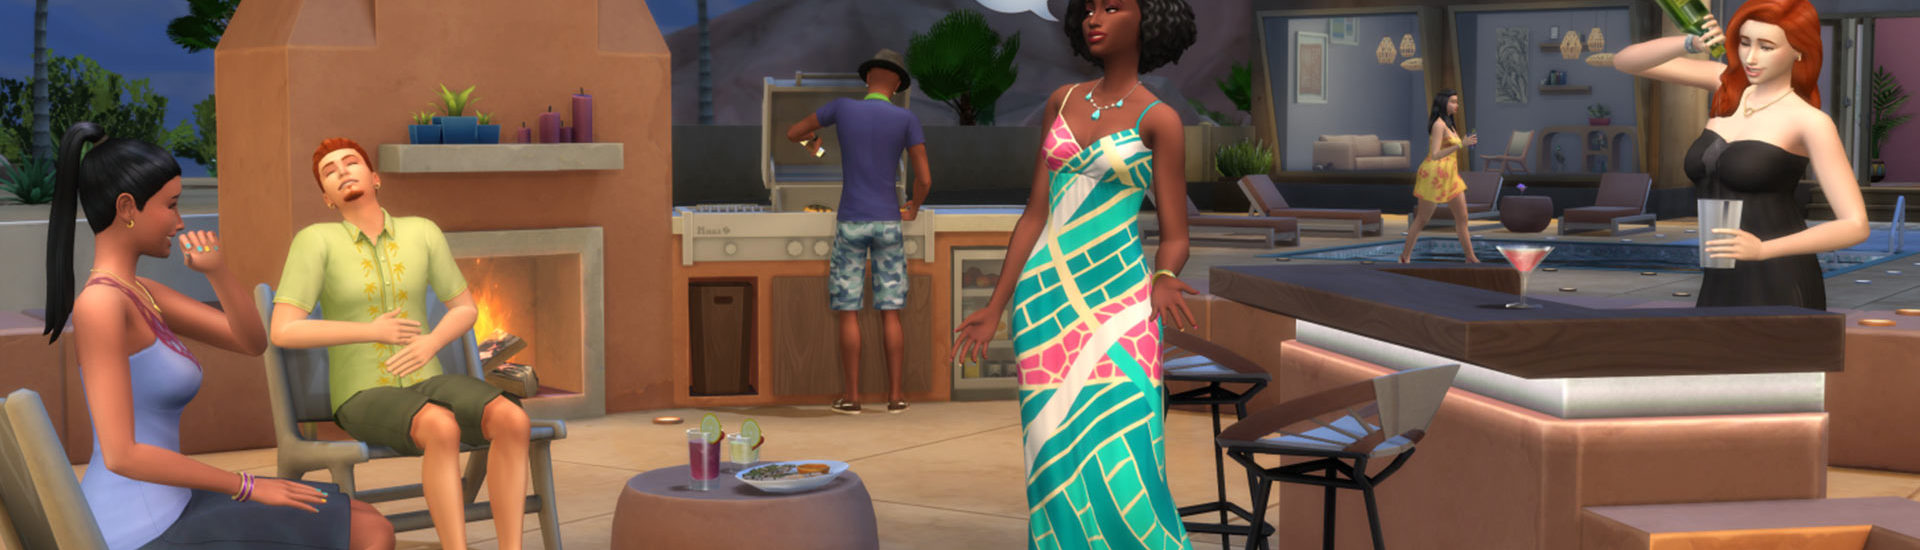 Die Sims 4 wird Free-to-Play